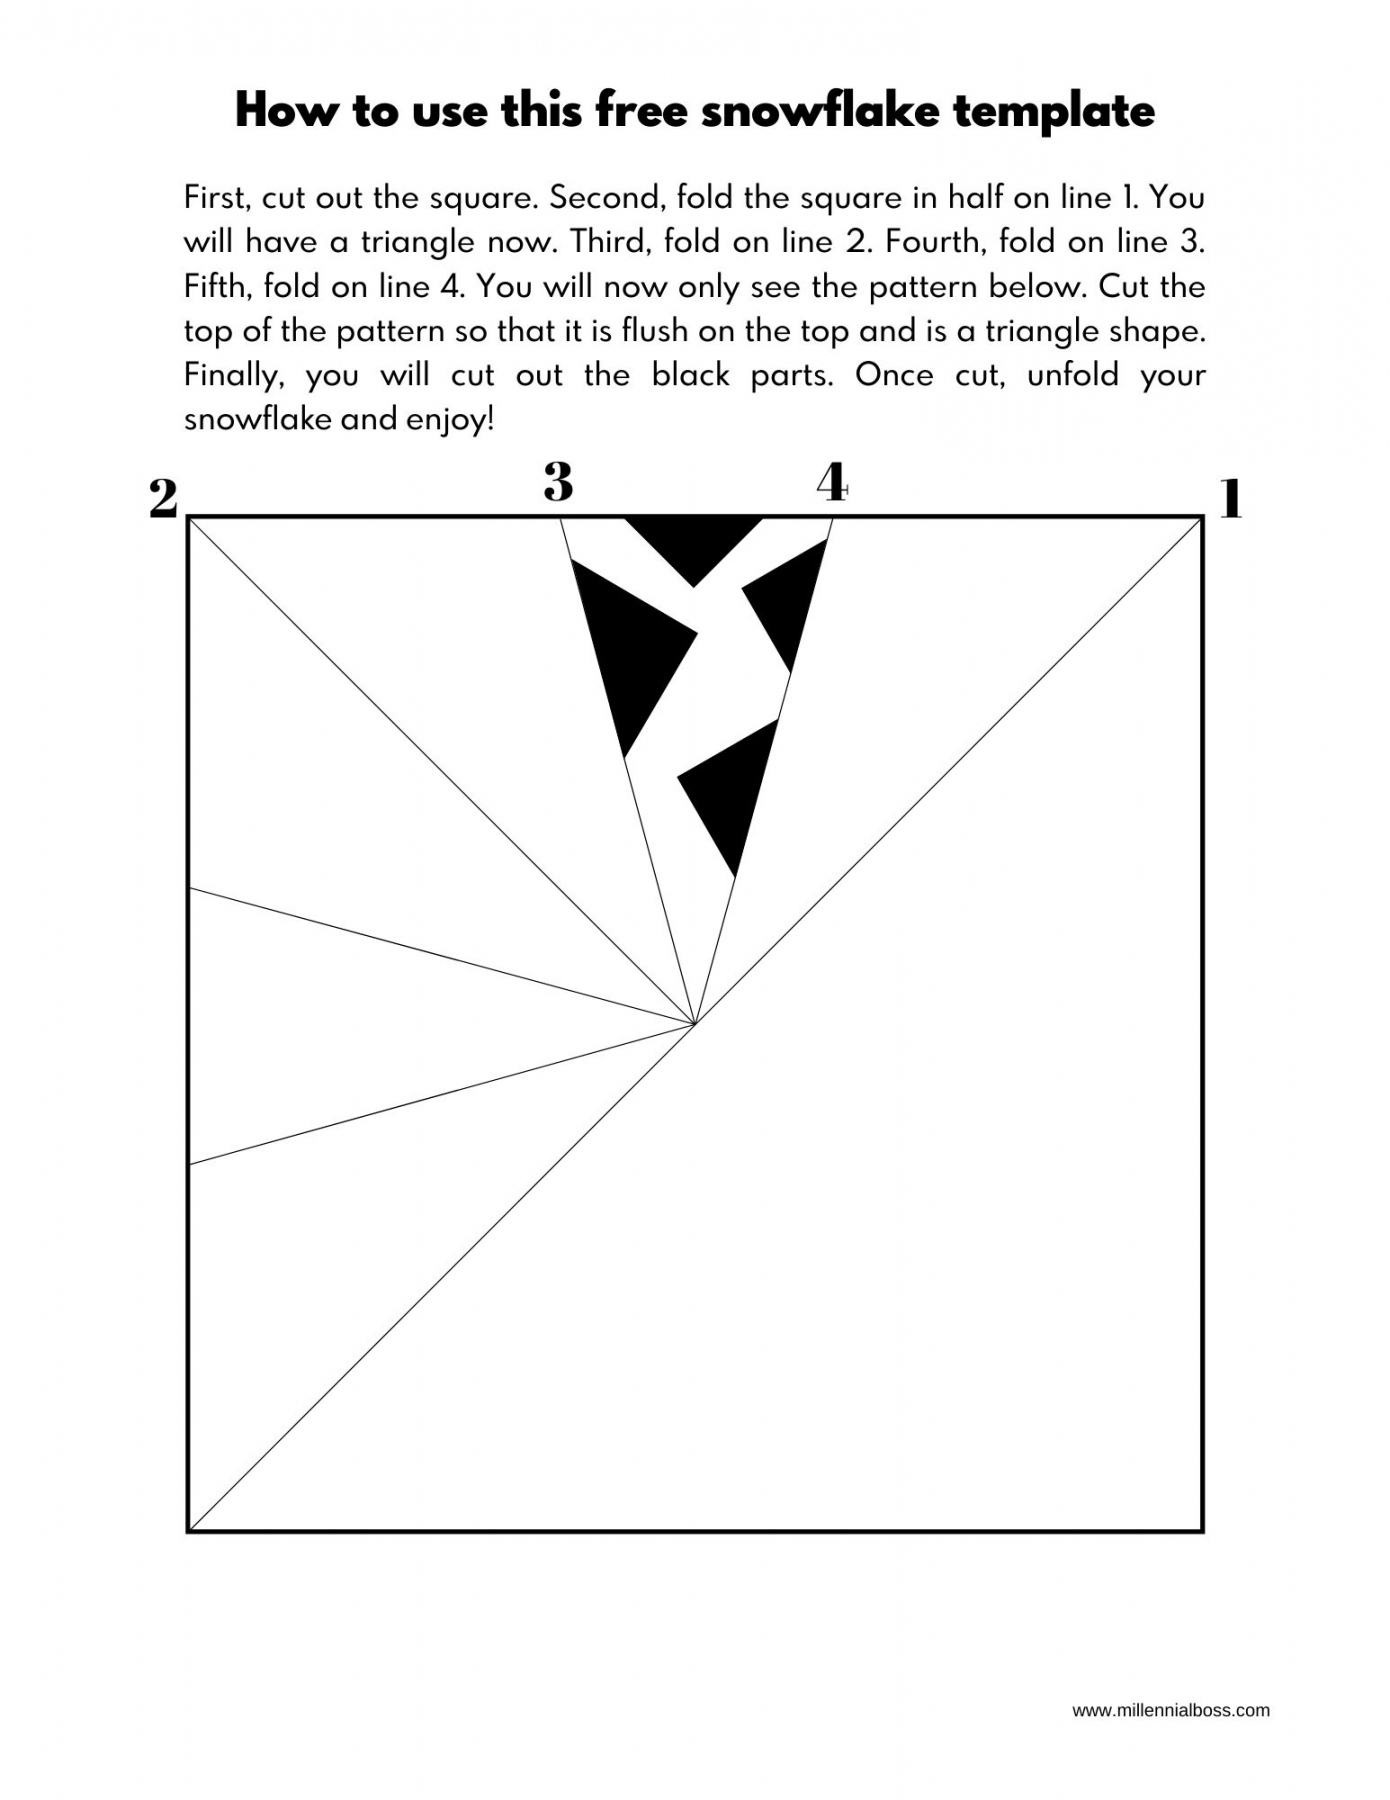 Free Snowflake Templates easy, quick and cute FREE PDF - FREE Printables - Snowflake Template Pdf